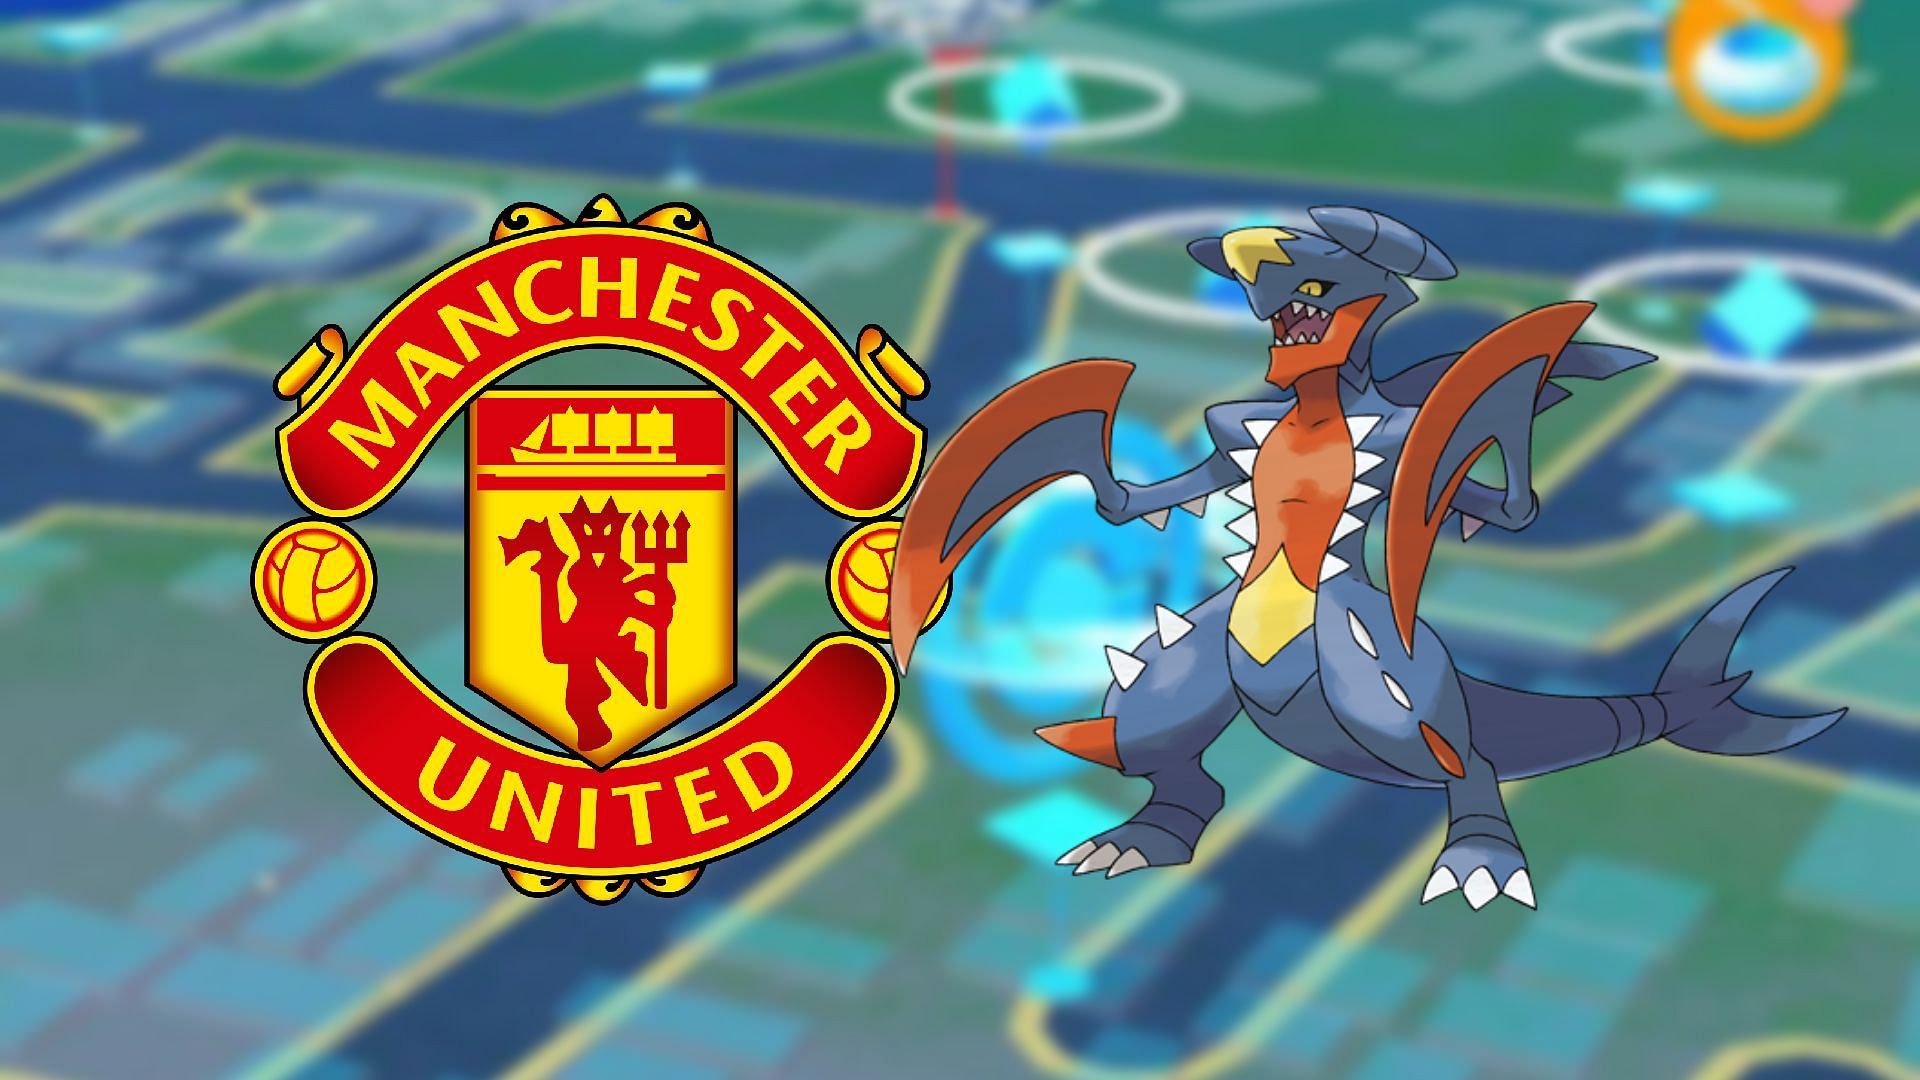 Pokemon GO player playing during Manchester United match